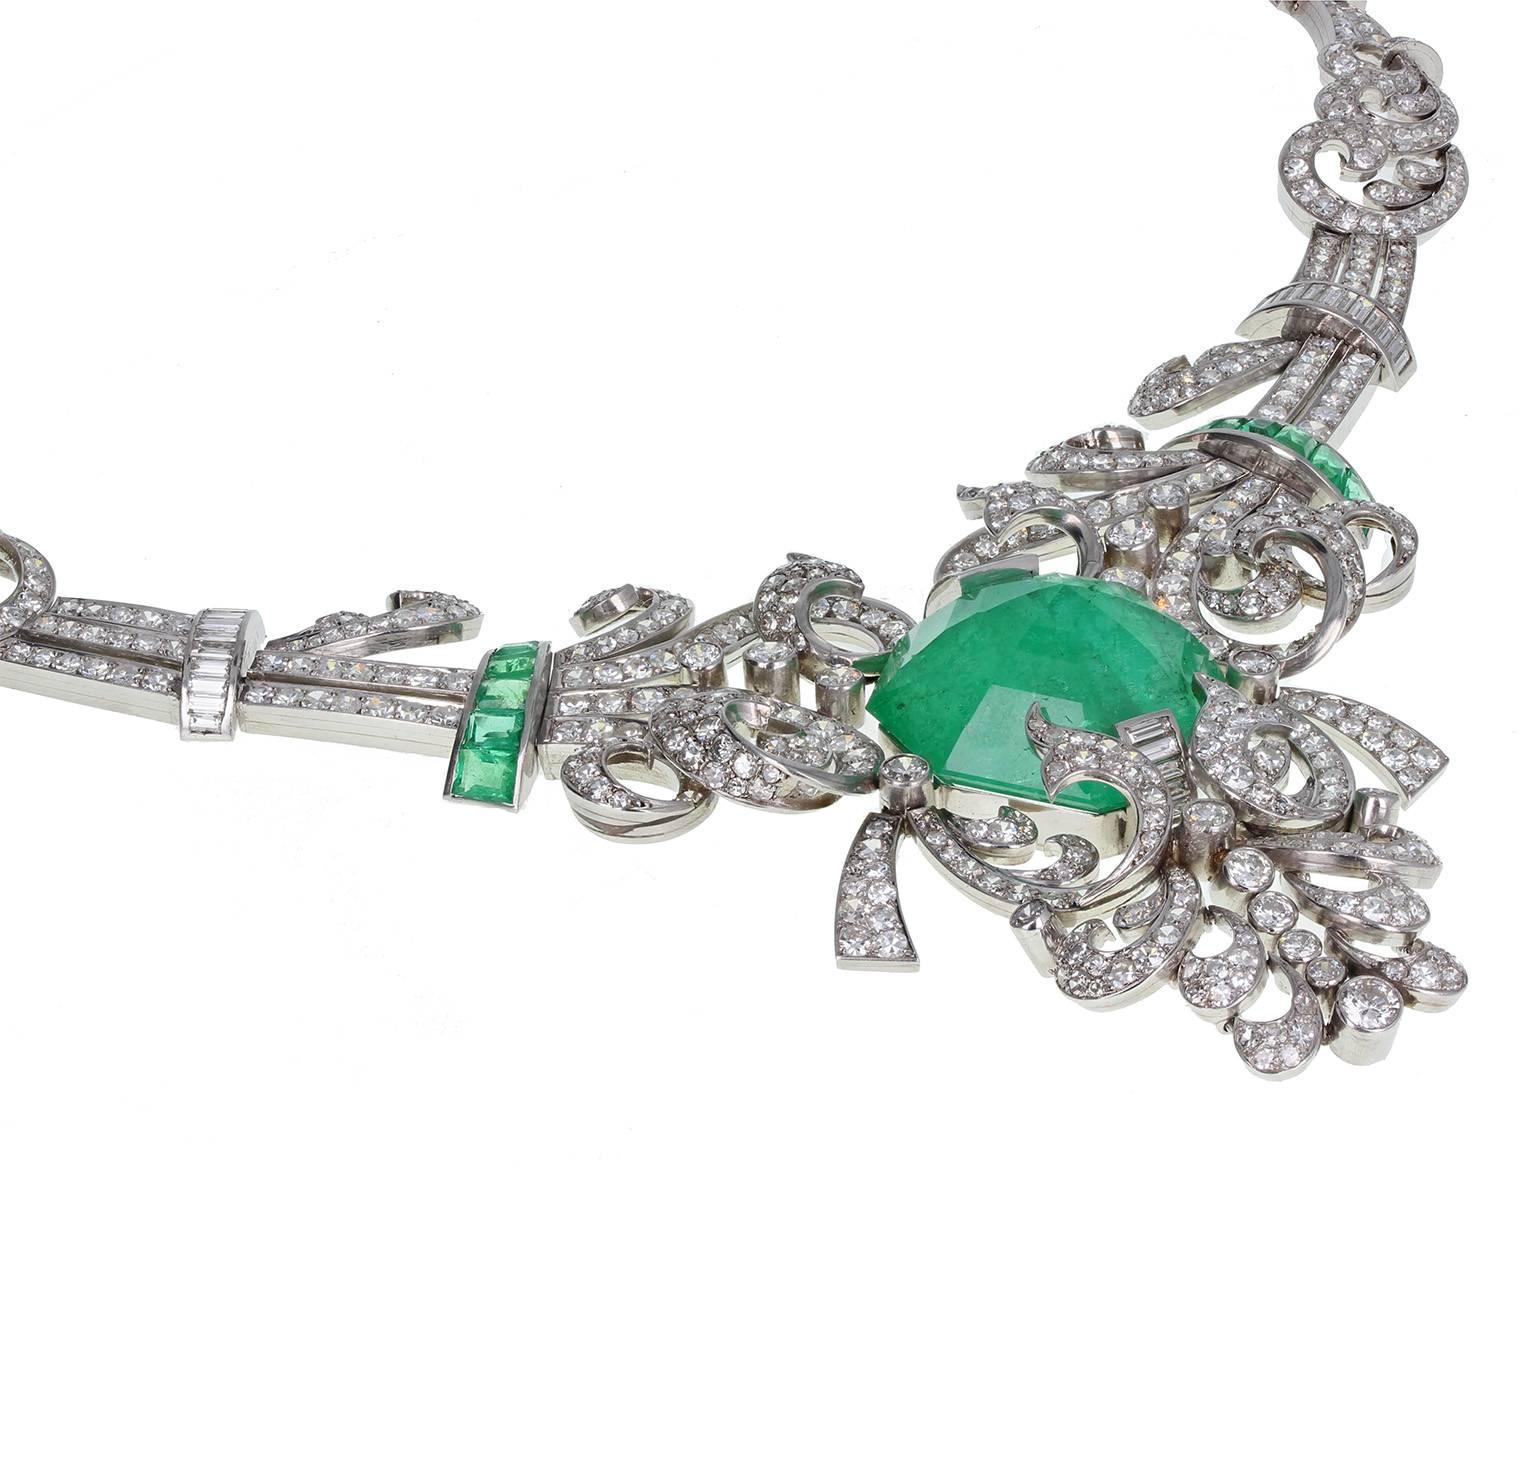 An exquisite French 1920s necklace in platinum. A dramatic and impressive necklace comprising of swirls and swags of platinum, set with single-cut and brilliant-cut diamonds, centred around a single, massive octagonal-cut Colombian emerald of